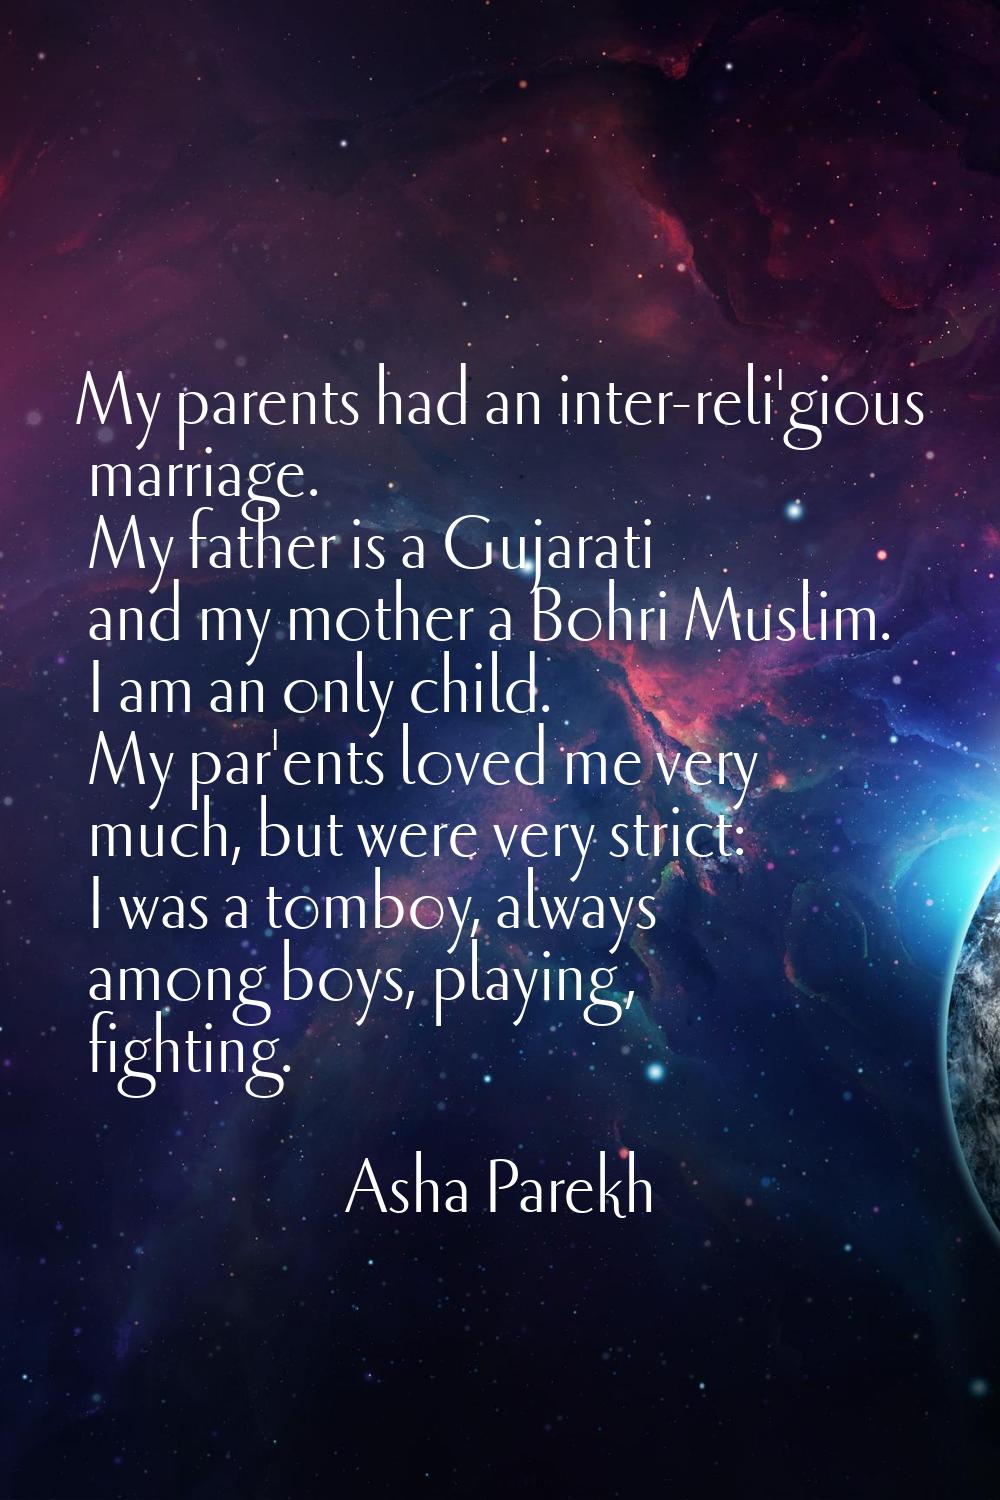 My parents had an inter-reli'gious marriage. My father is a Gujarati and my mother a Bohri Muslim. 